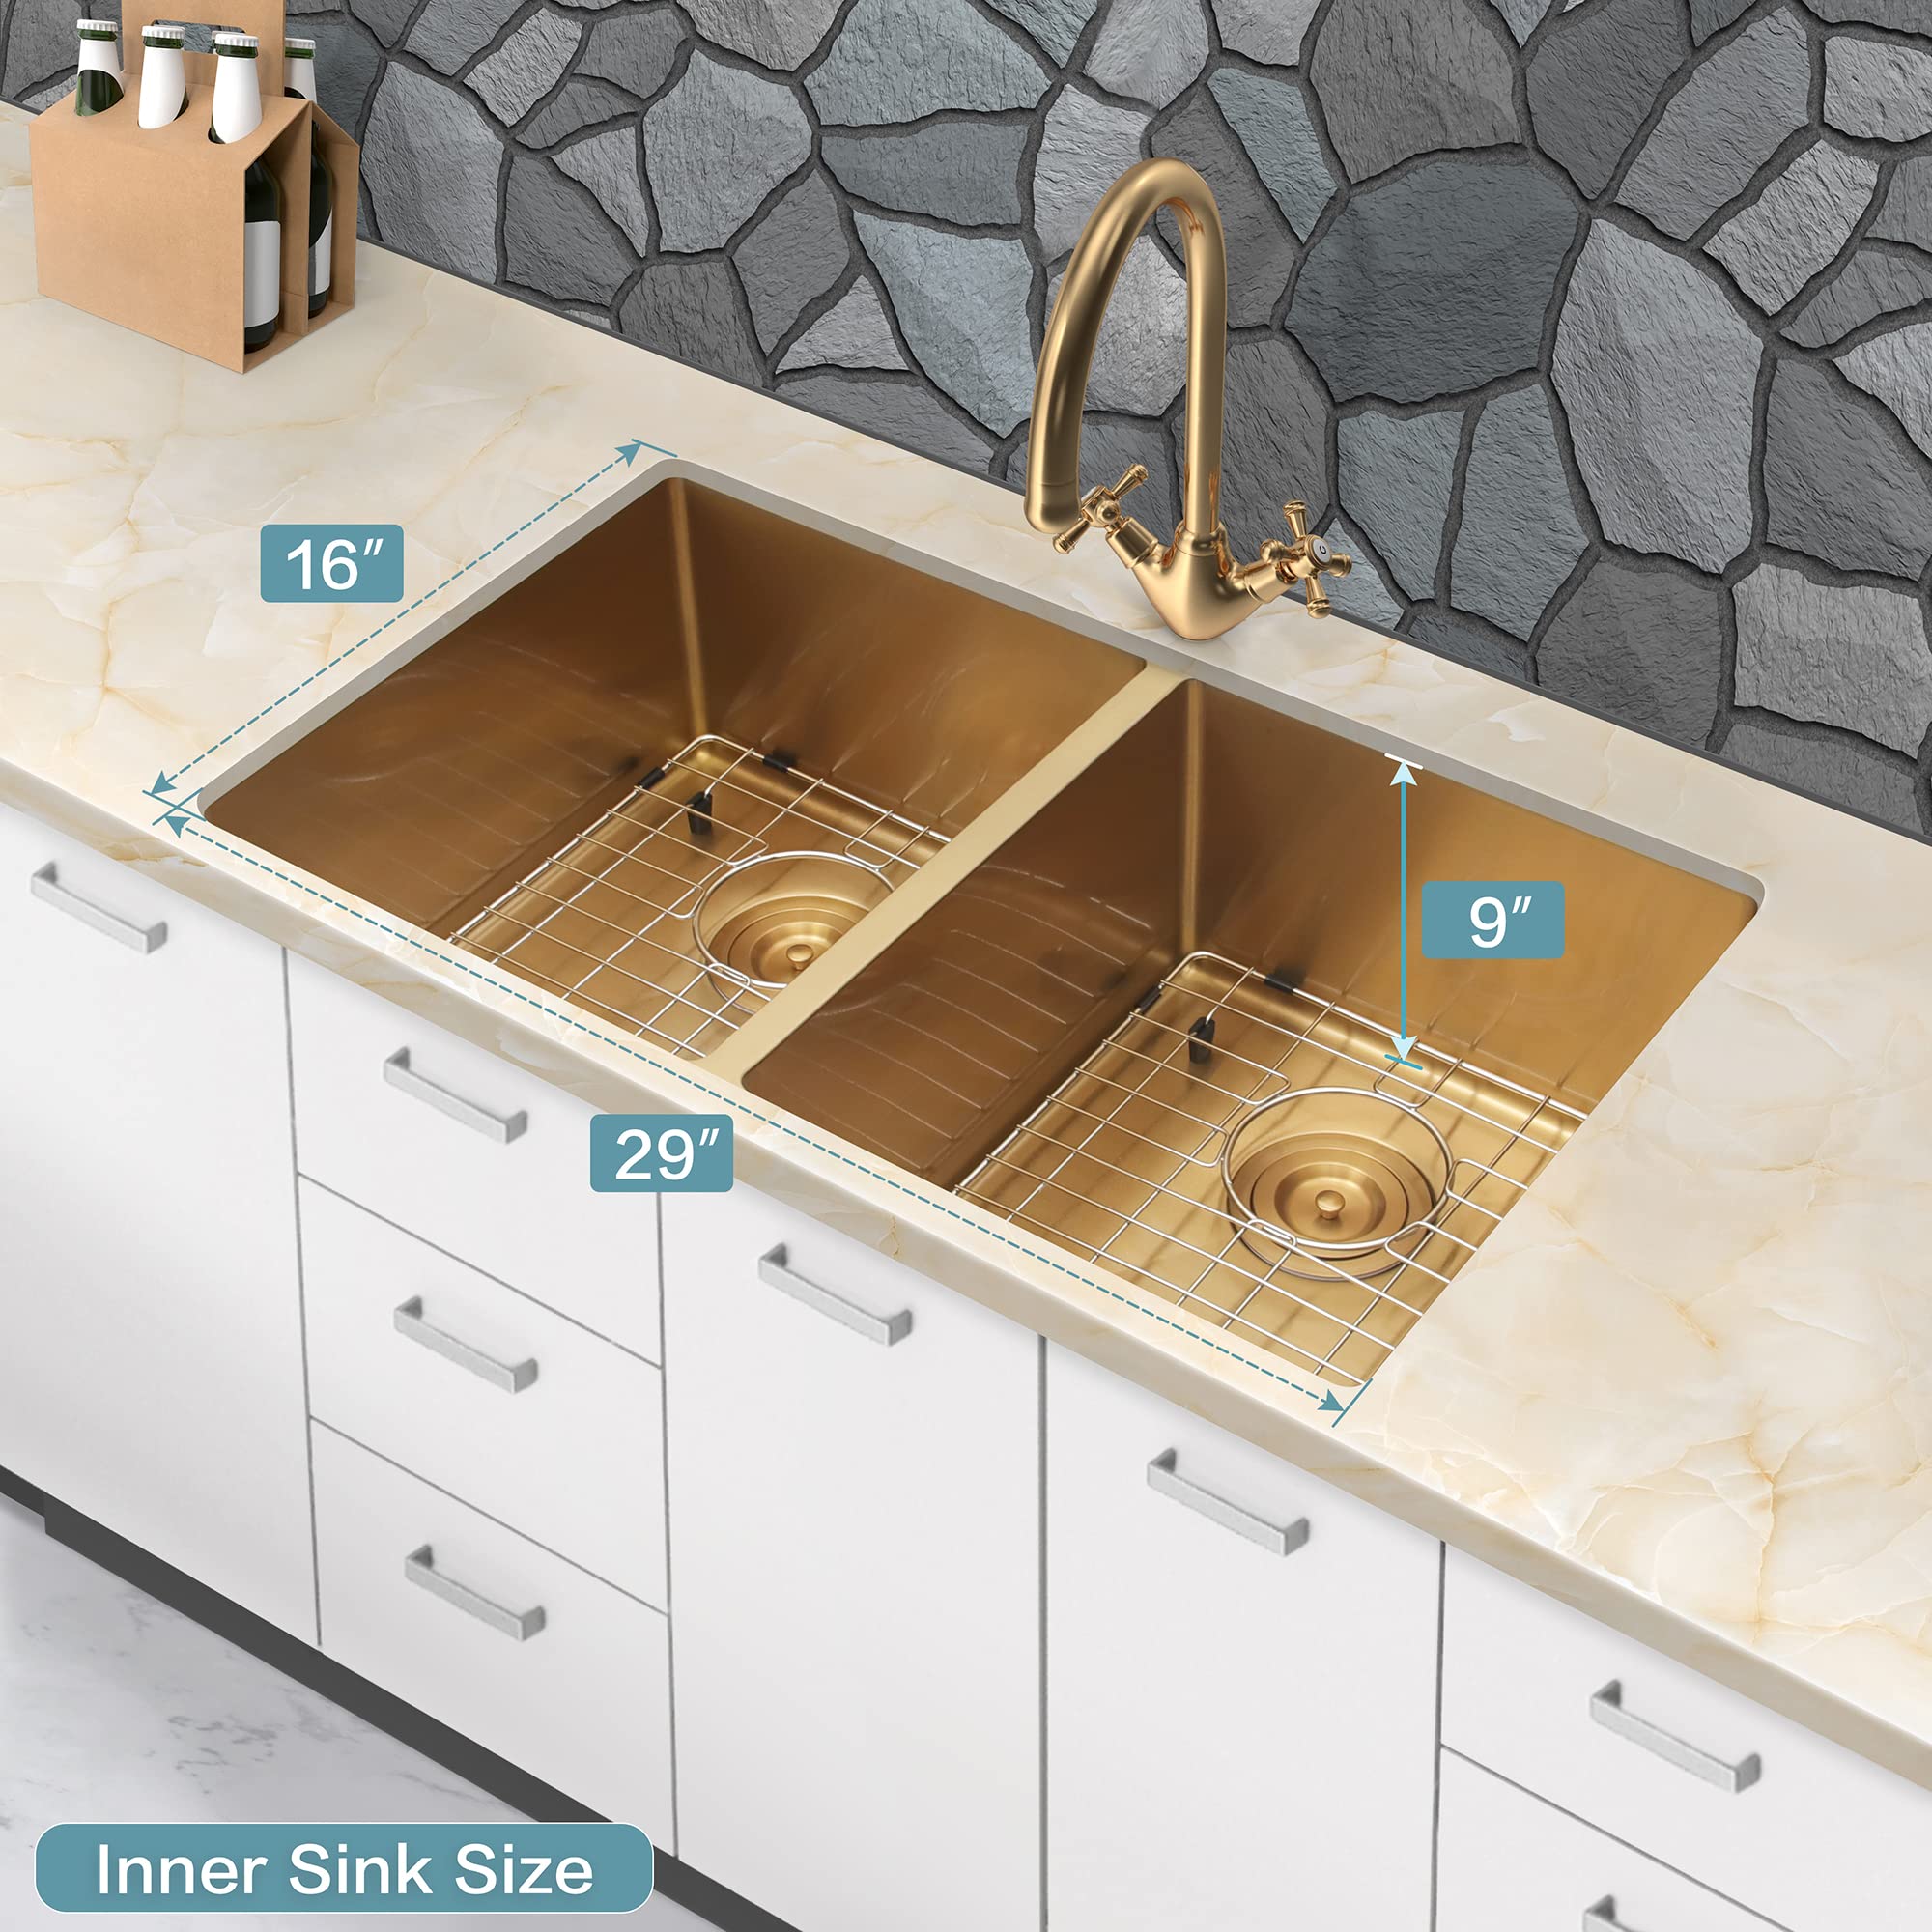 LQS Undermount Kitchen Sink Double Bowl 31 Inch Gold Colour, Stainless Steel Double Bowl Kitchen Sink, Double Bowl Kitchen Sinks with Accessories